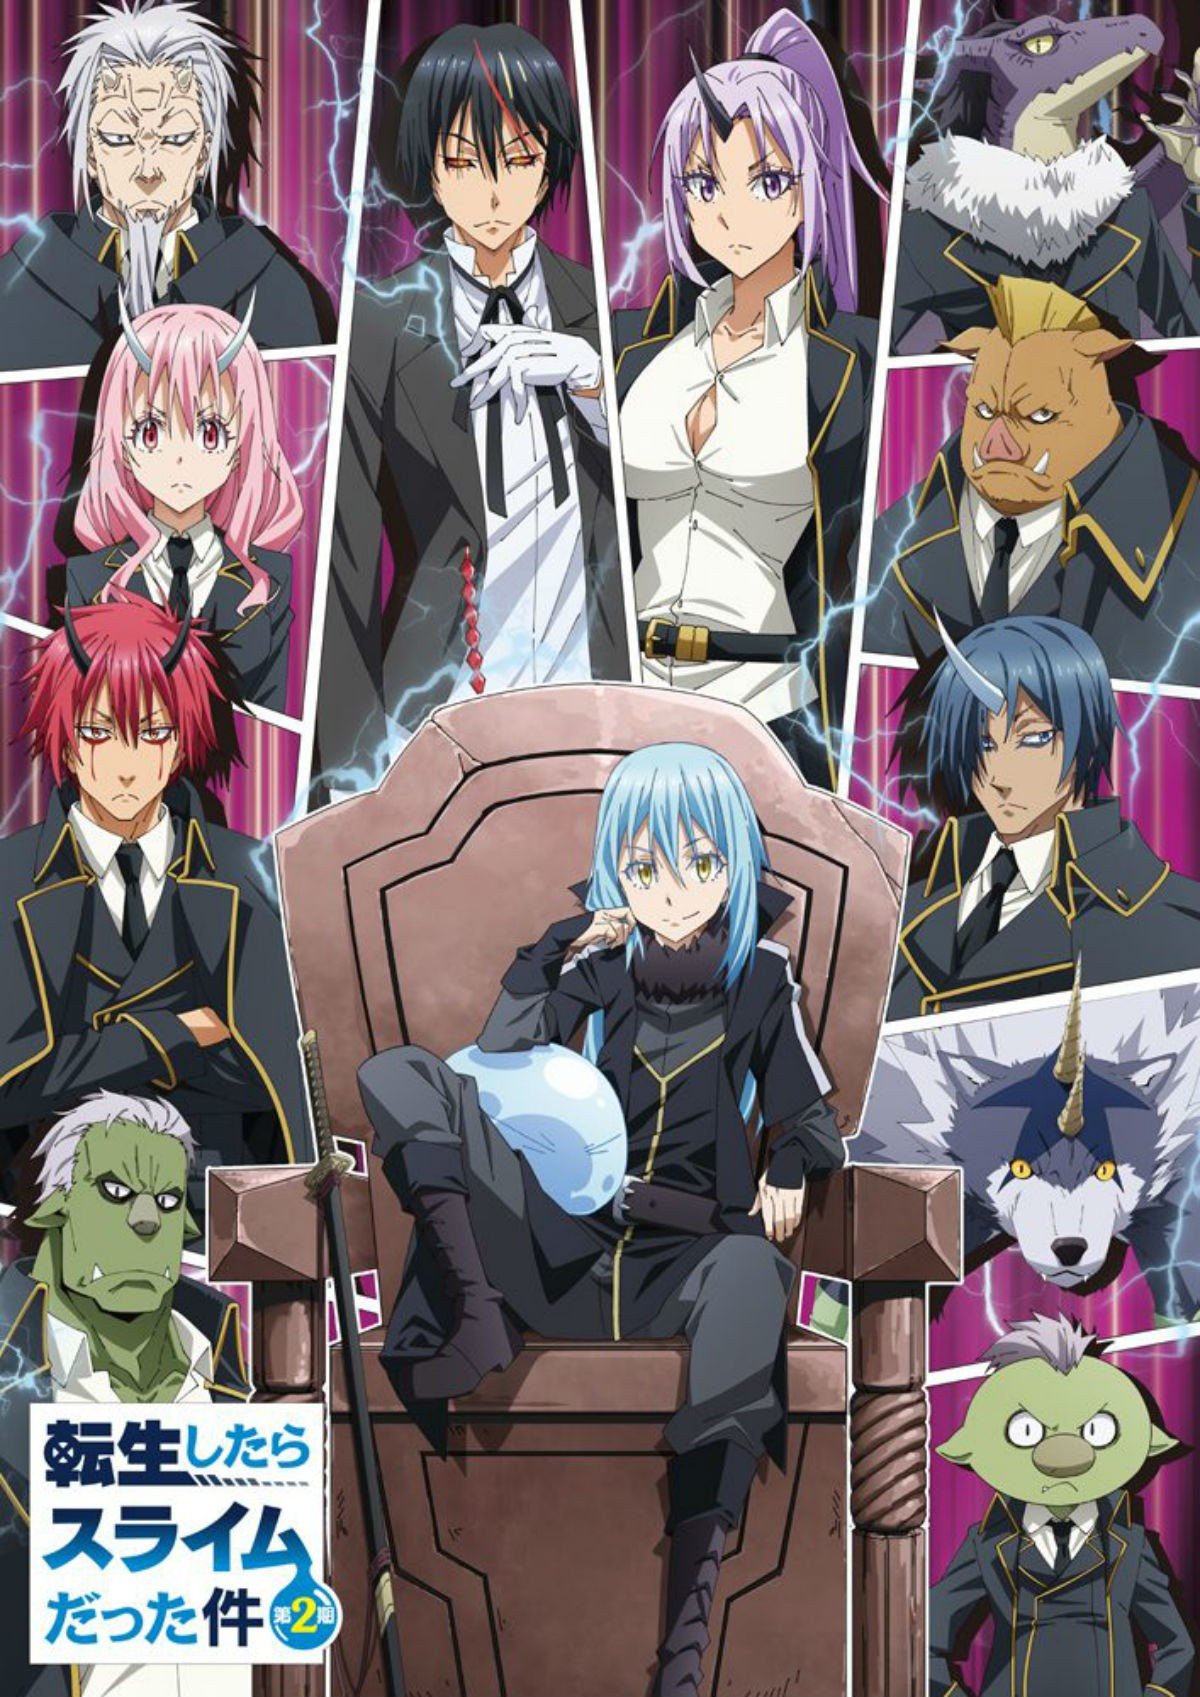 Key visual poster for the second season of That Time I Got Reincarnated As A Slime